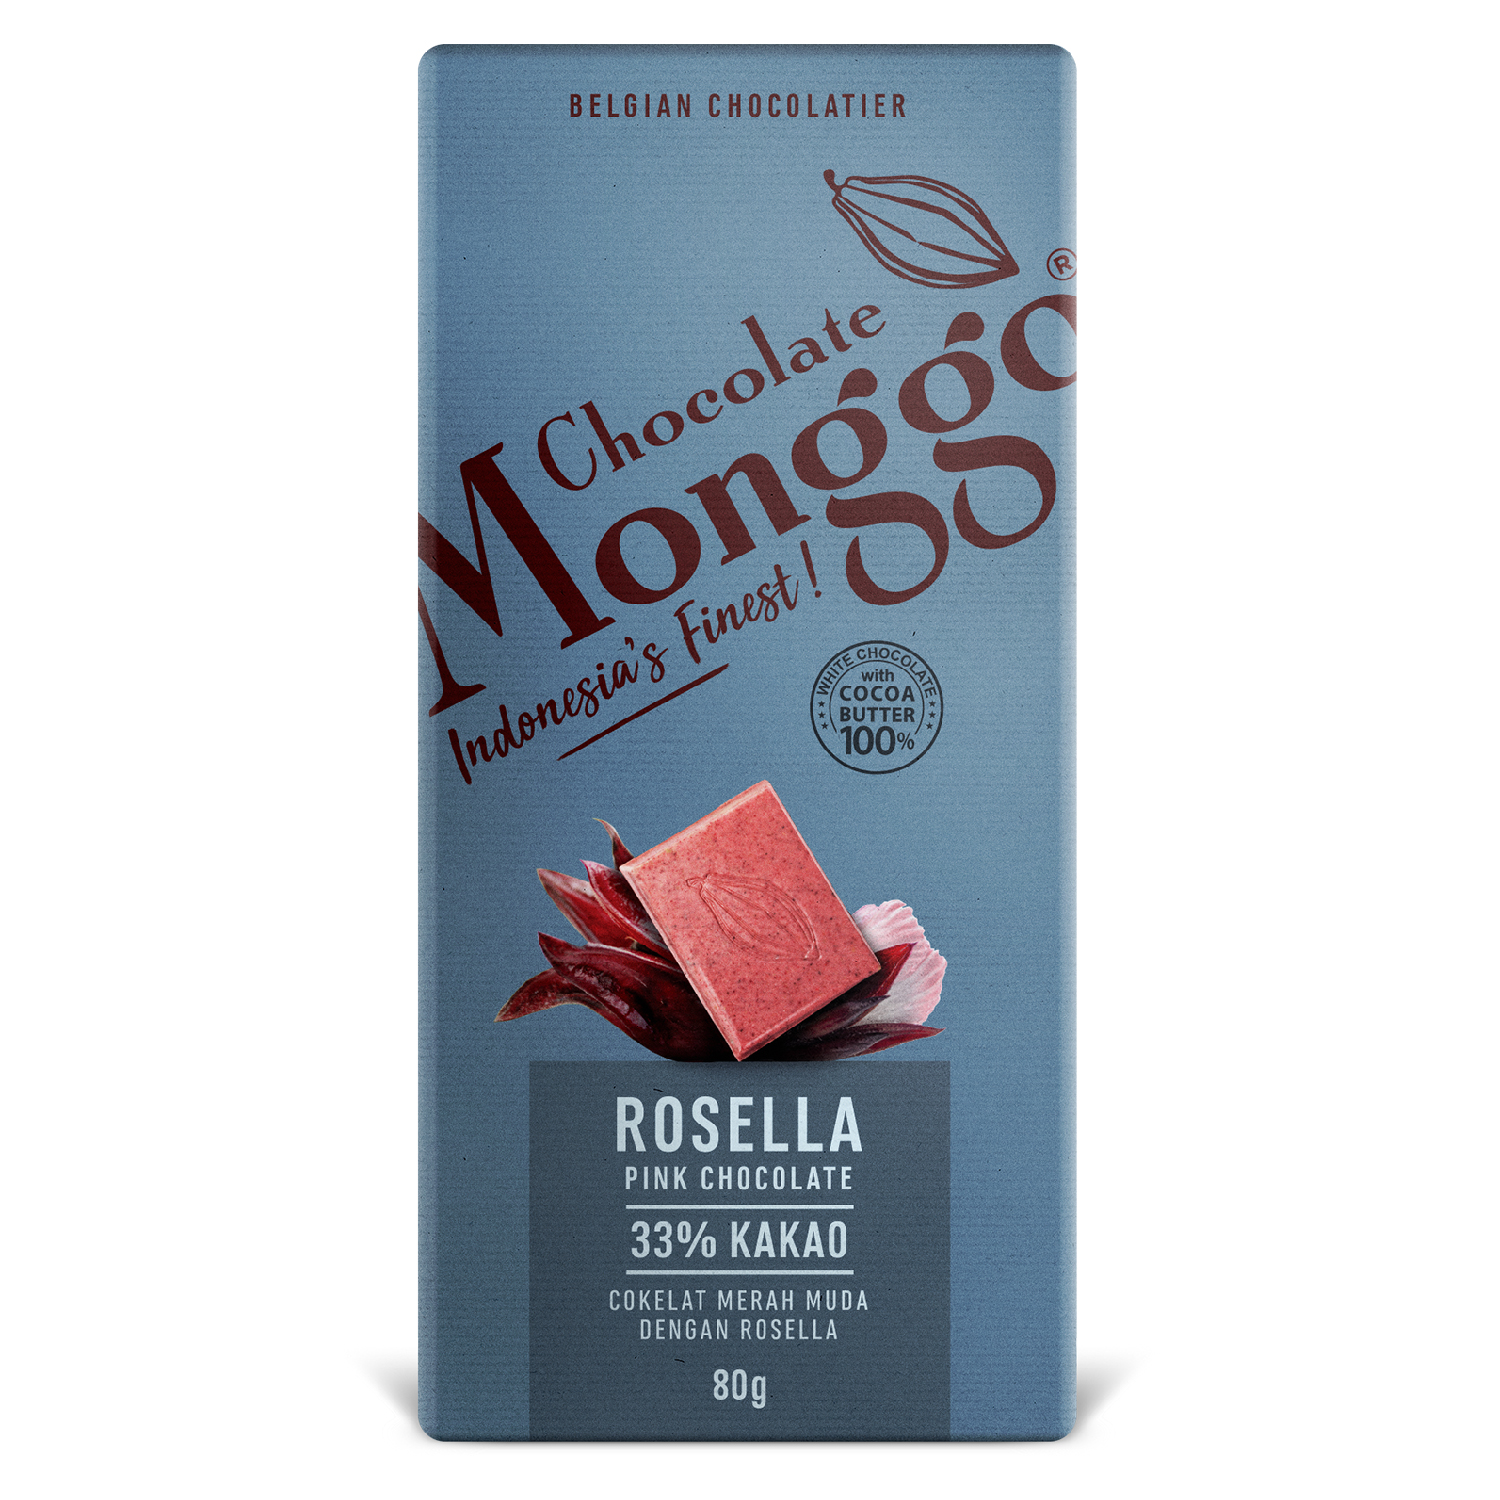 PINK CHOCOLATE TABLET WITH ROSELLA